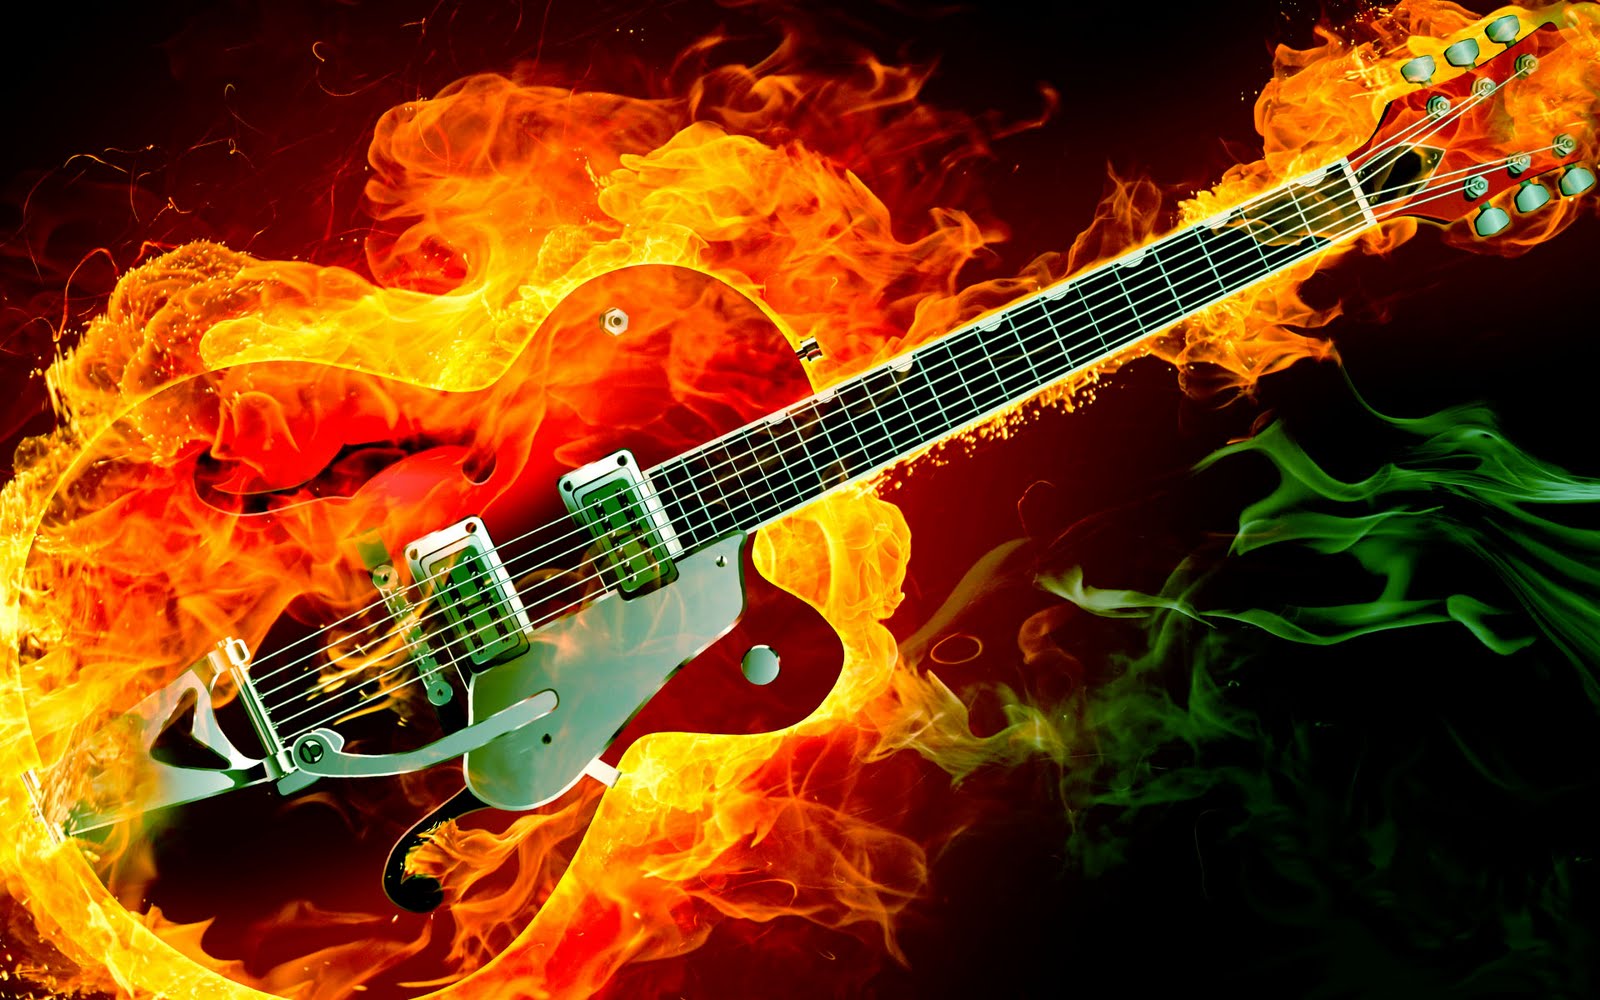 RePin image Guitar On Blue Fire Guitar On on Pinterest